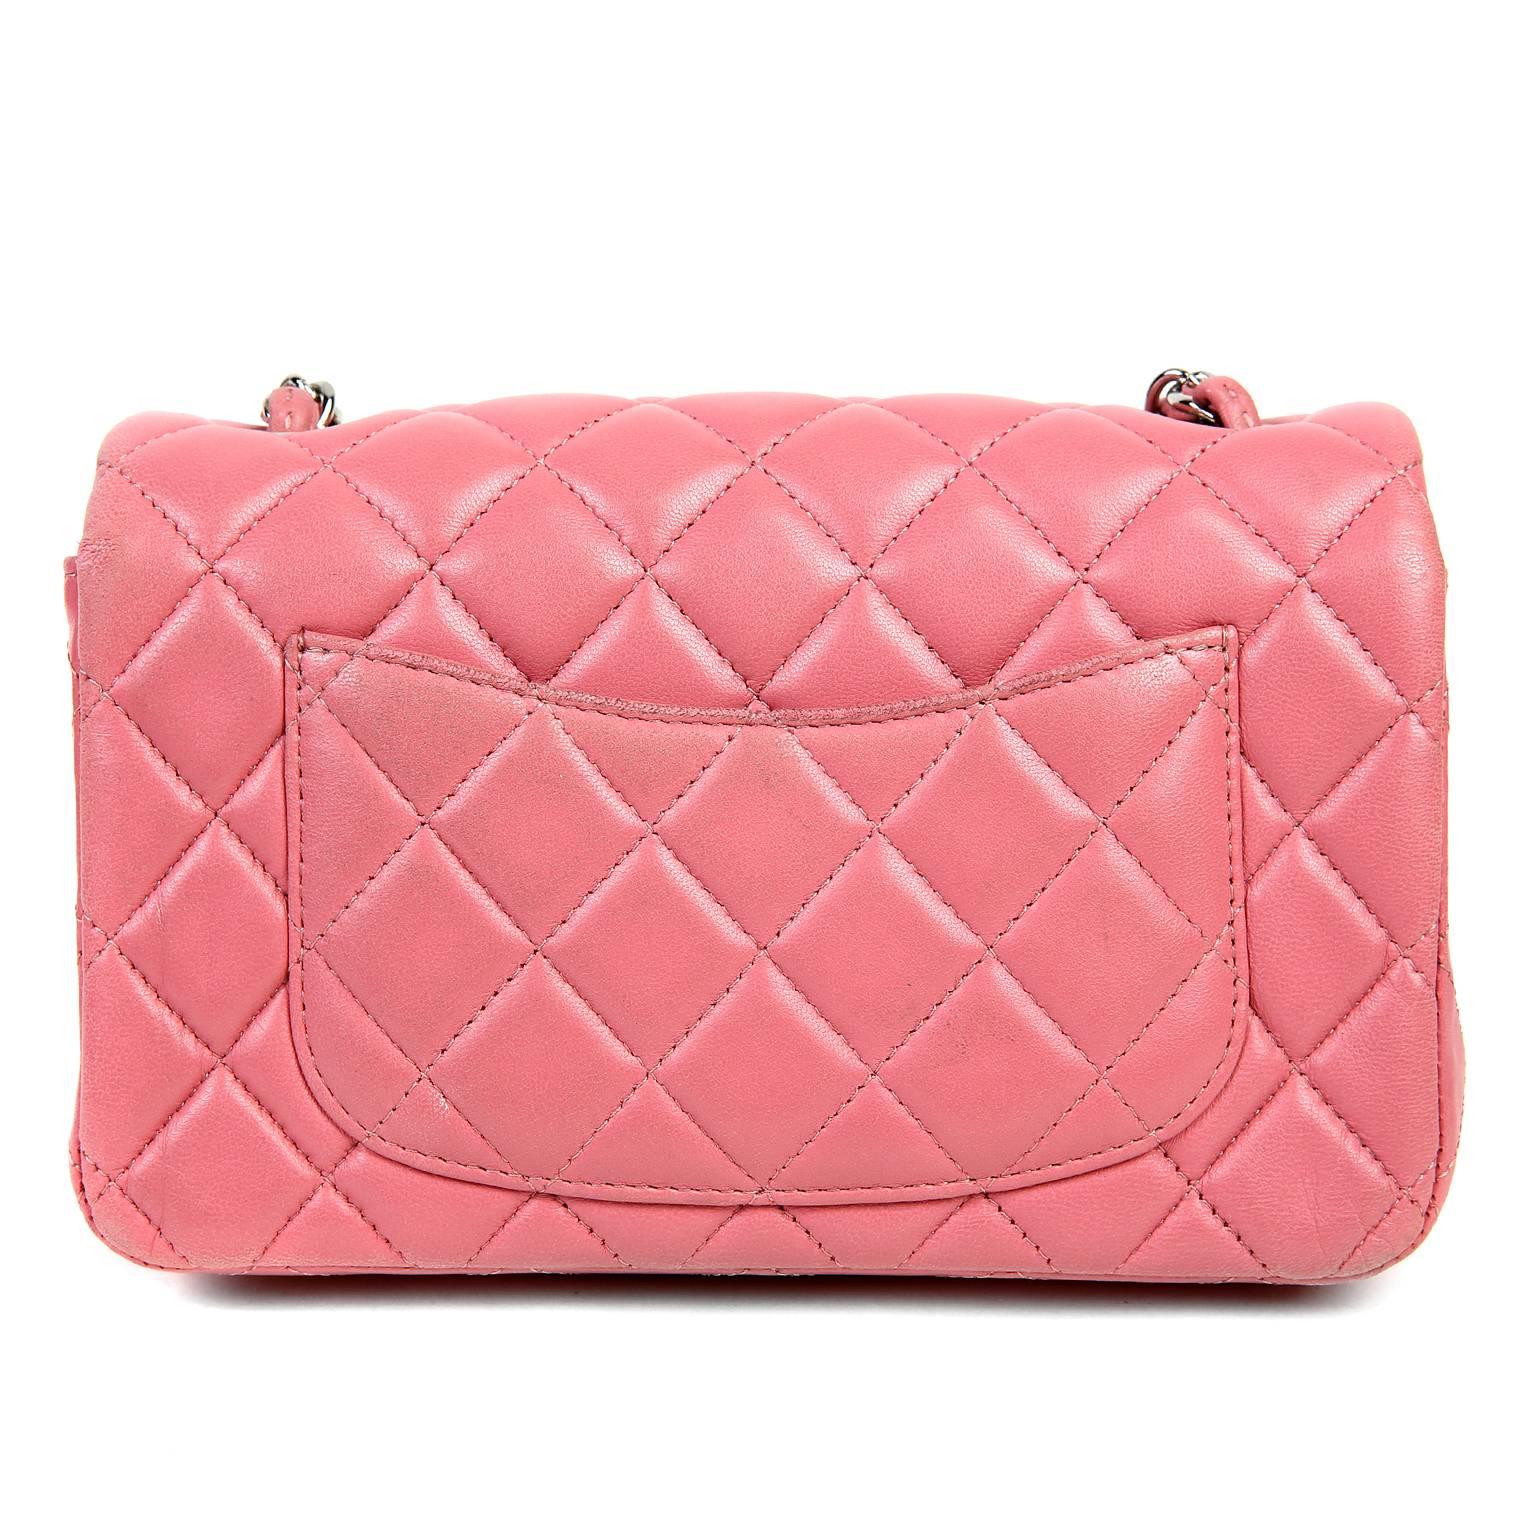 This Authentic Chanel Pink Lambskin Mini Classic is in better than excellent condition.  The pretty pink shade adds an extra dash of femininity to any ensemble. 

 Carnation pink lambskin is quilted in signature Chanel diamond stitched pattern. 